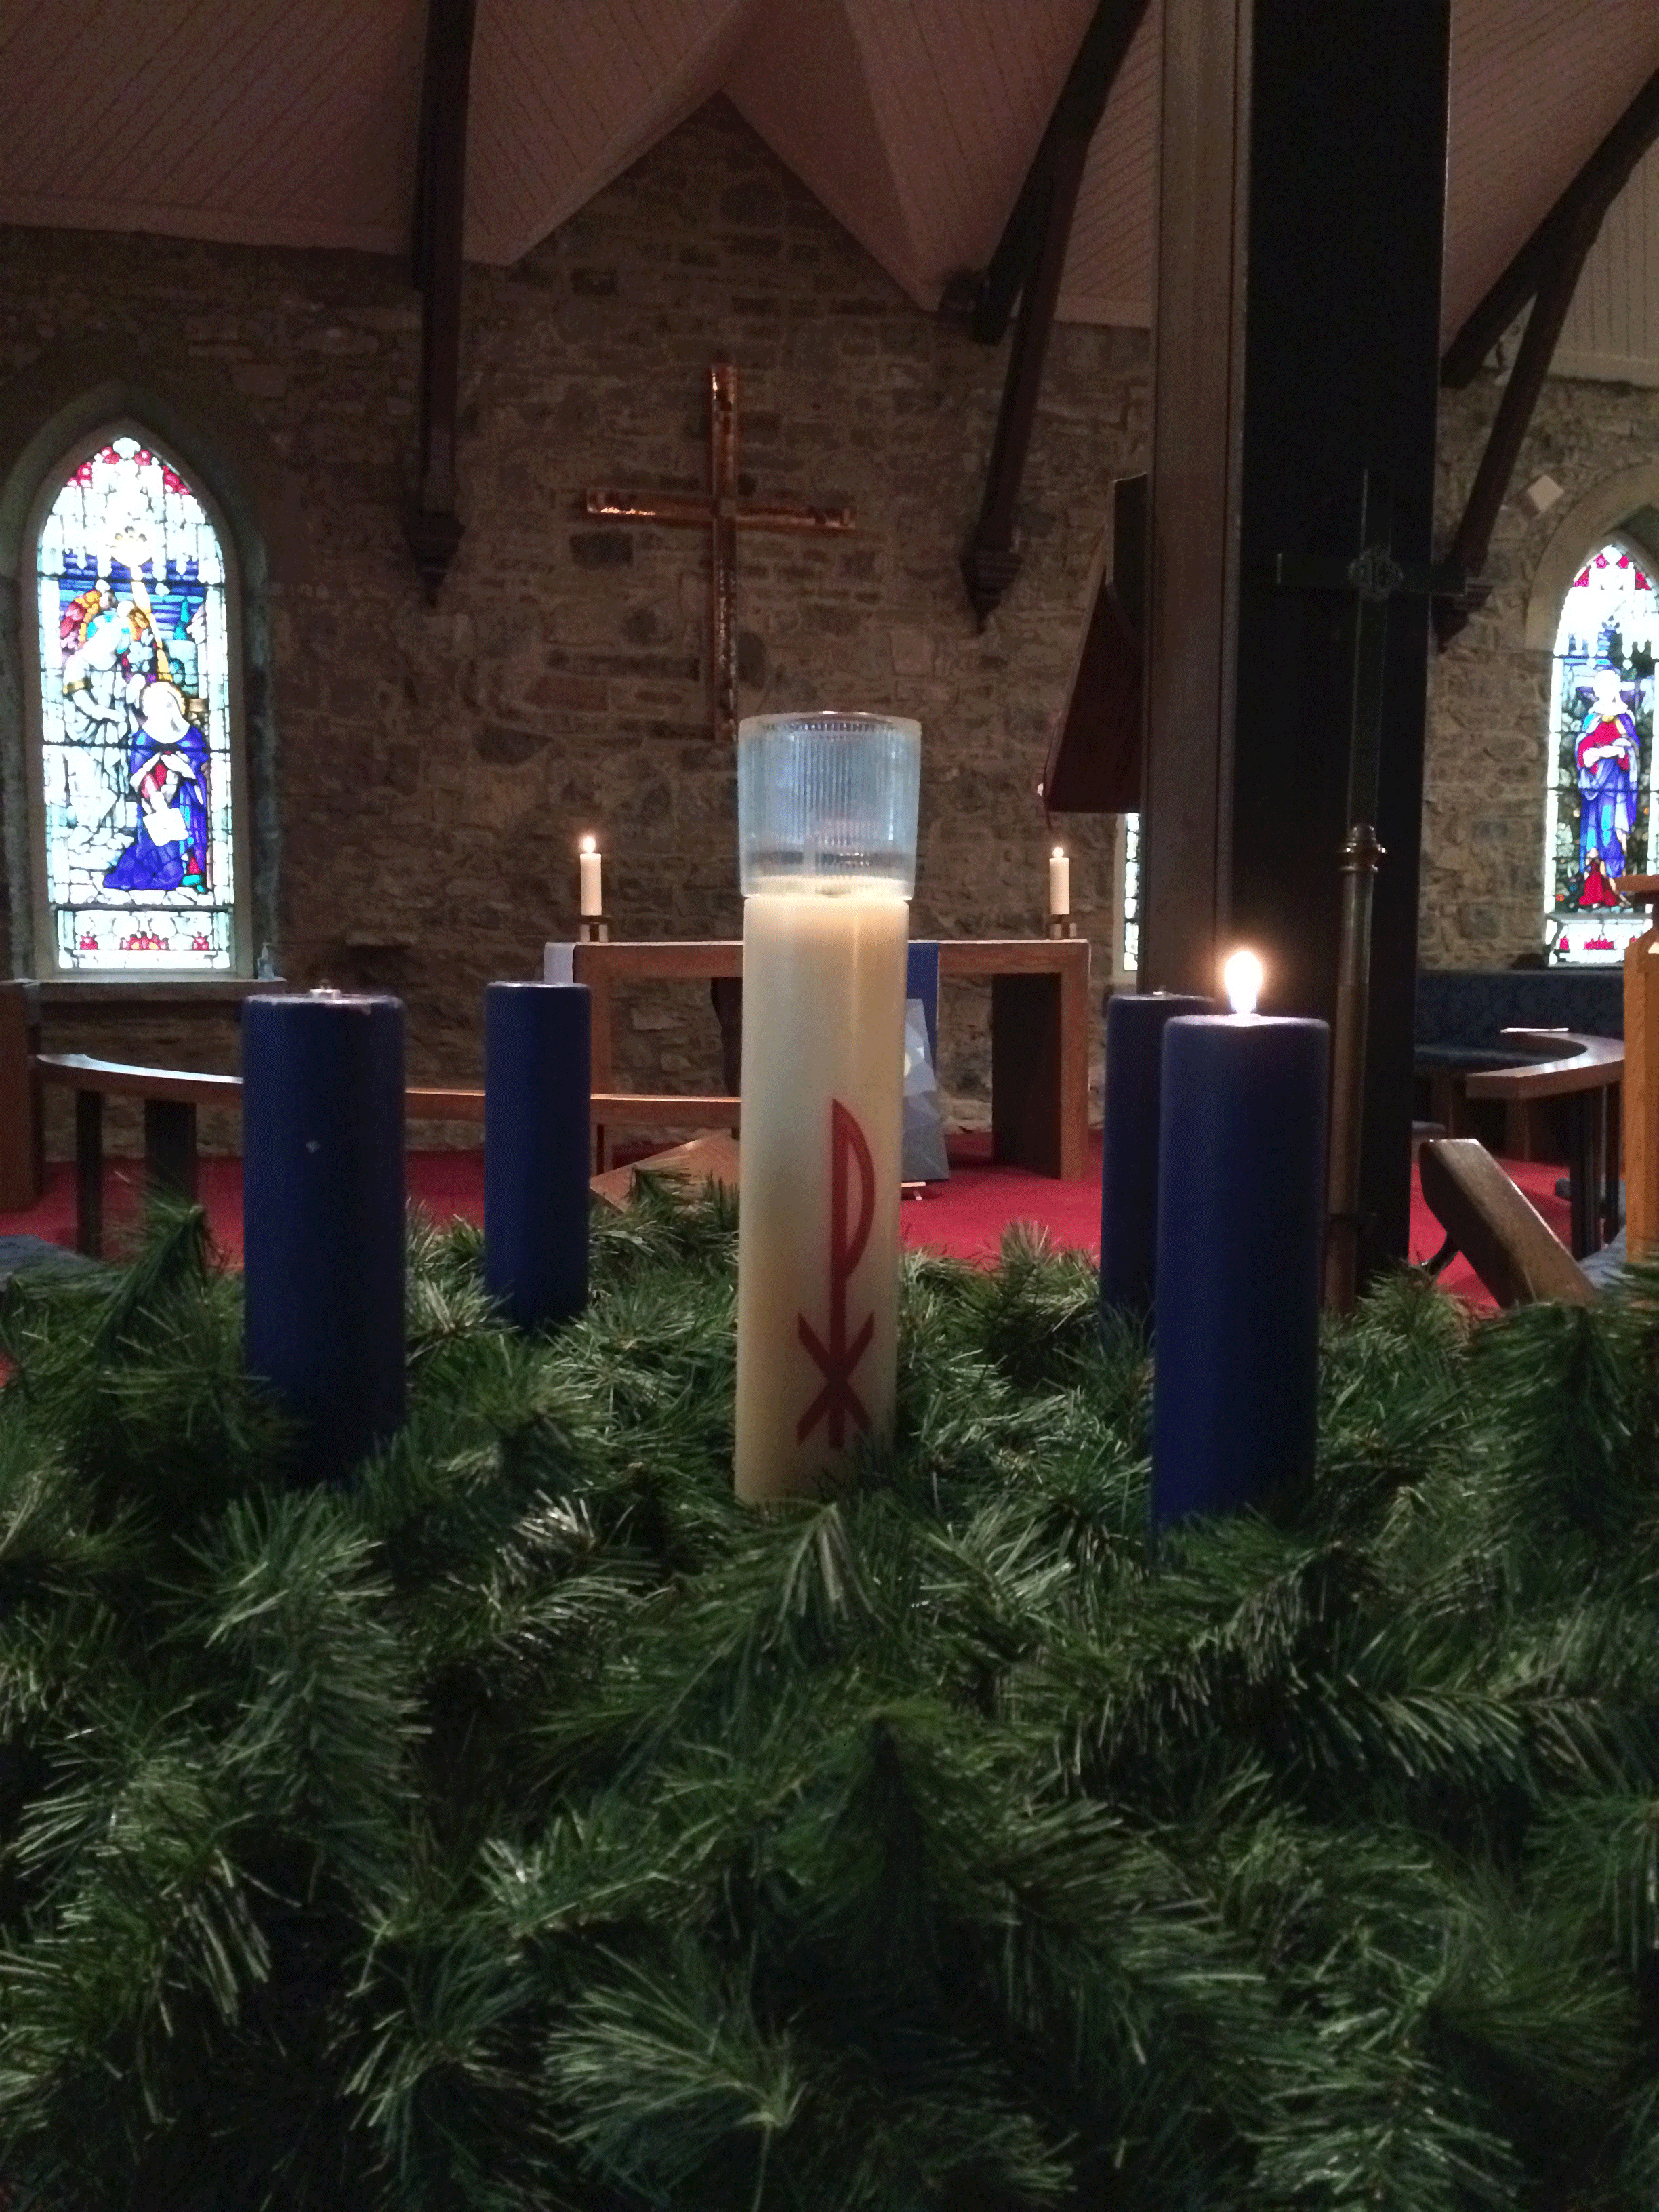 One candle lit in Nativity's Advent wreath